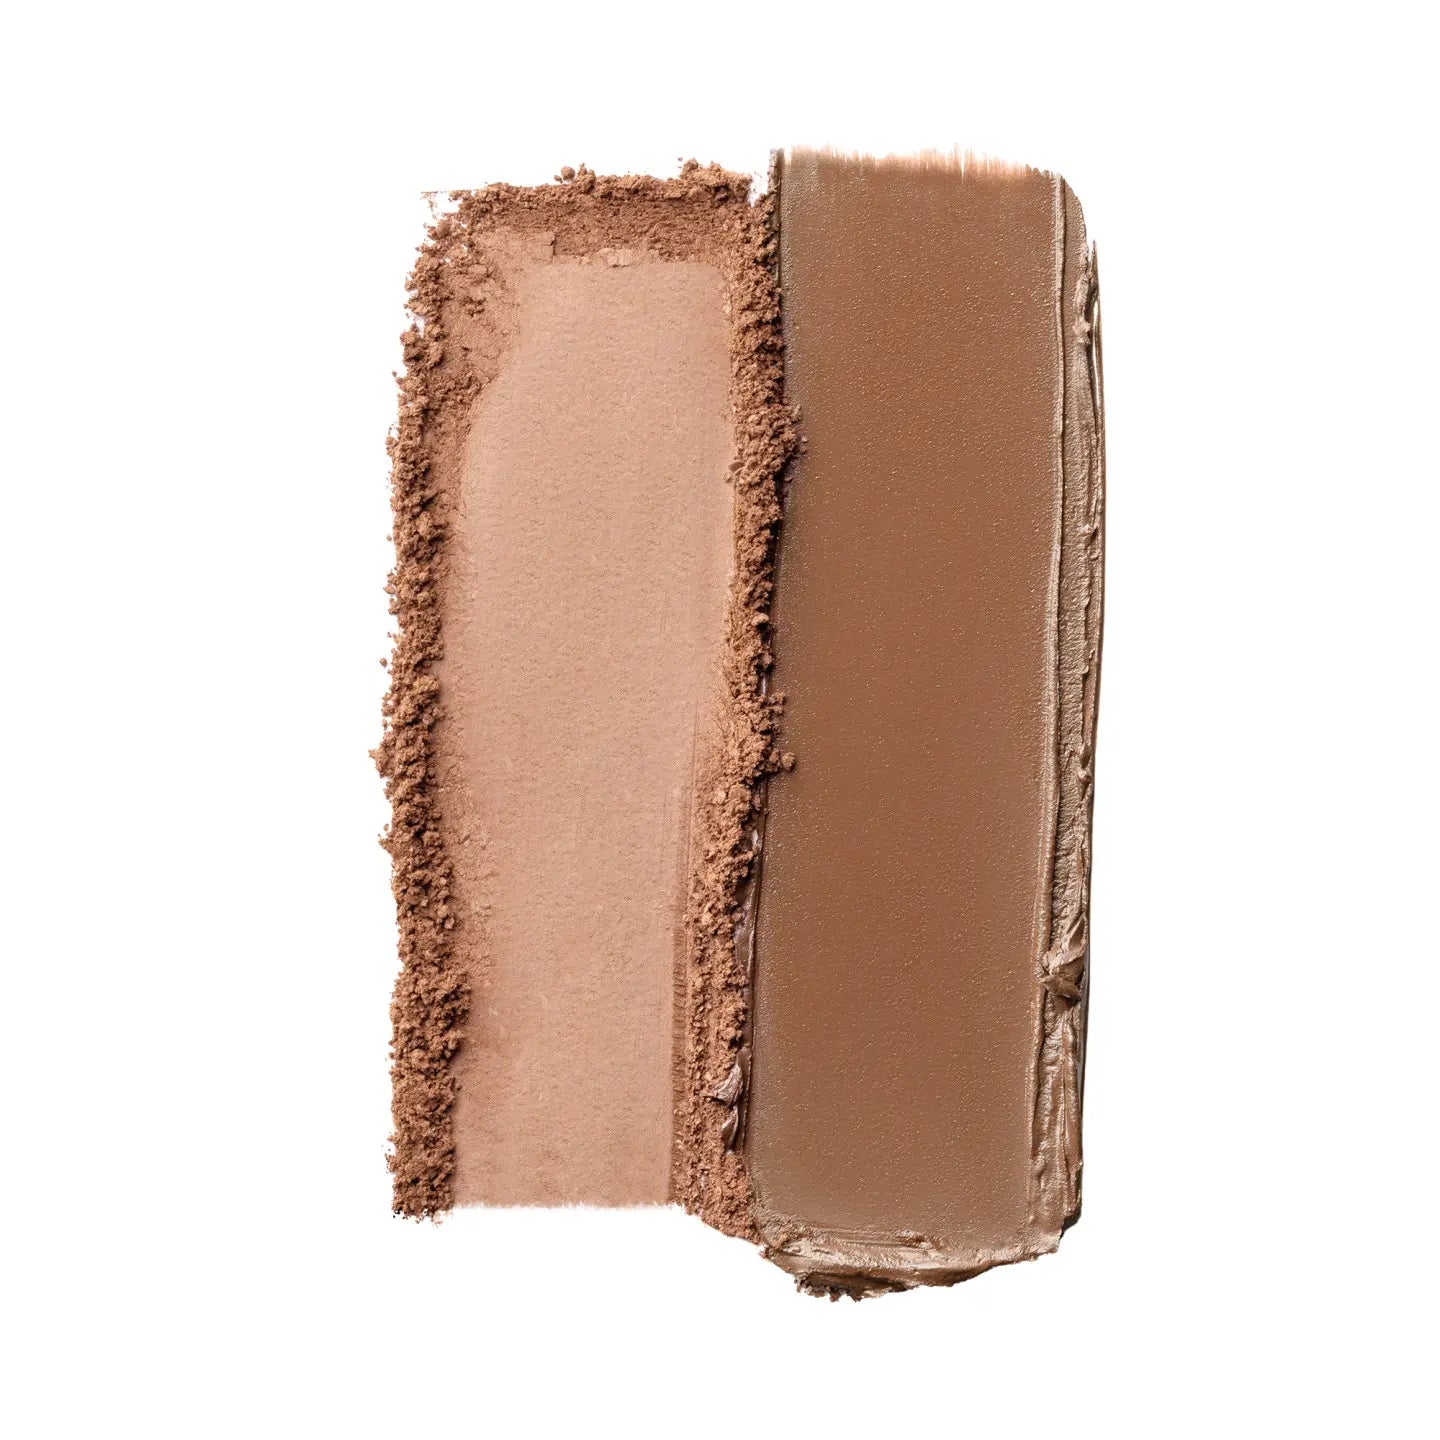 Selected: PICK IT UP Heatin' Up Contour & Bronzer Duo